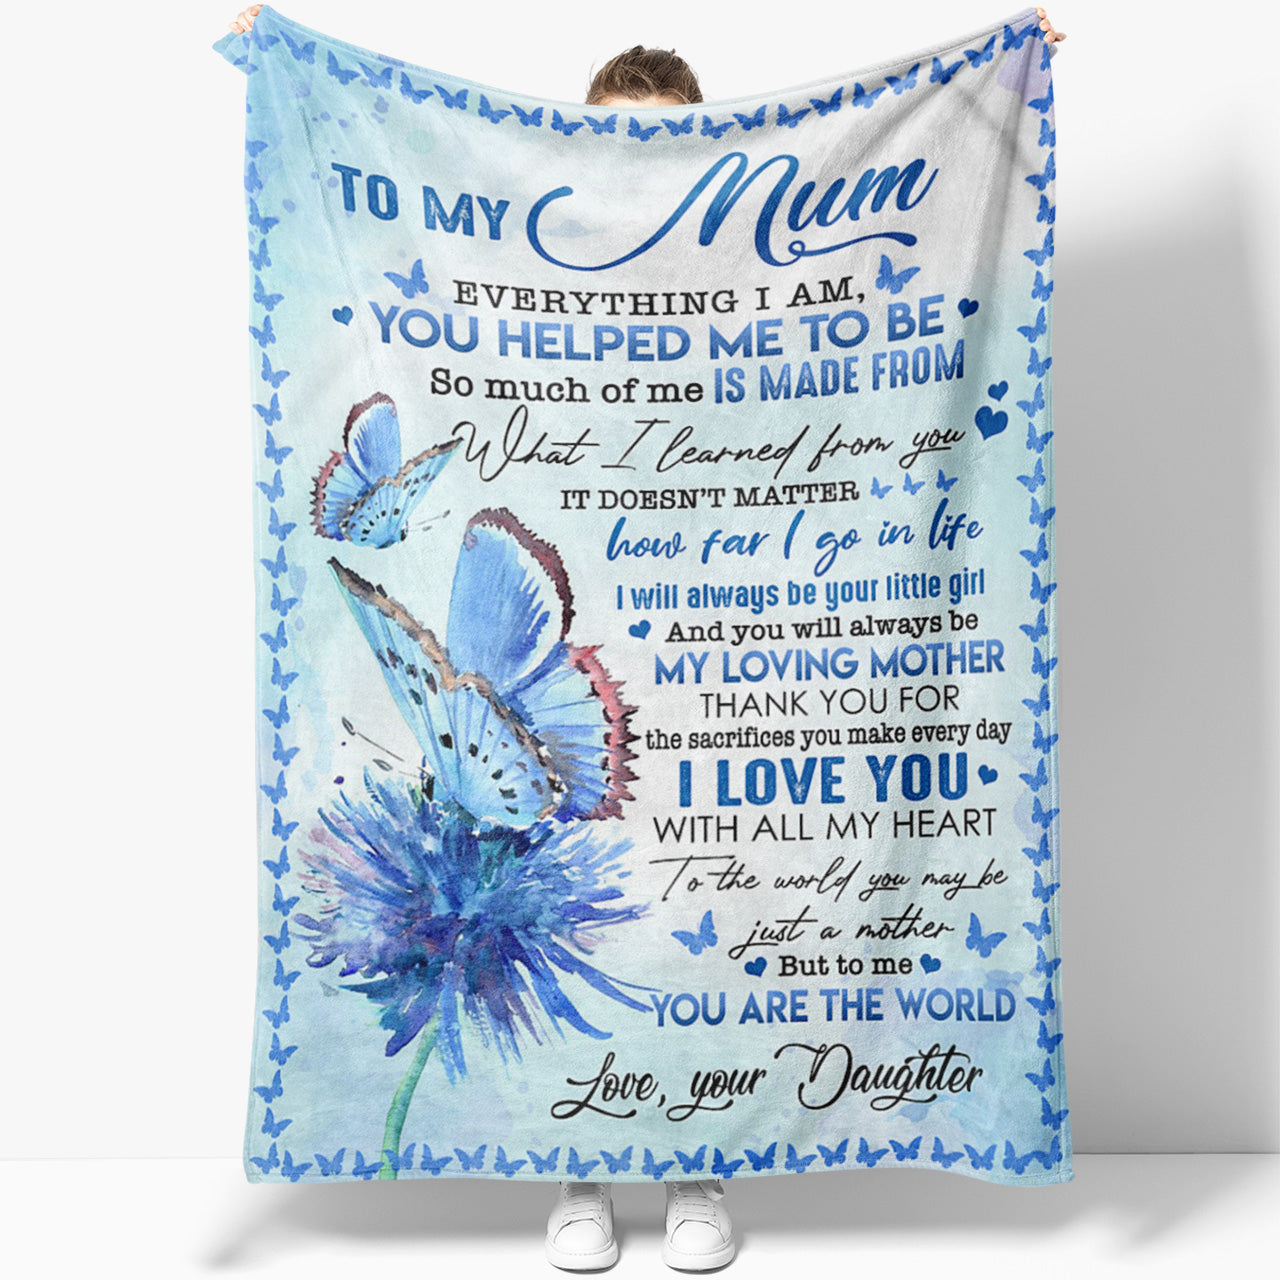 Blanket Gift ideas For Mom, Christmas Gifts For Mom, Because You